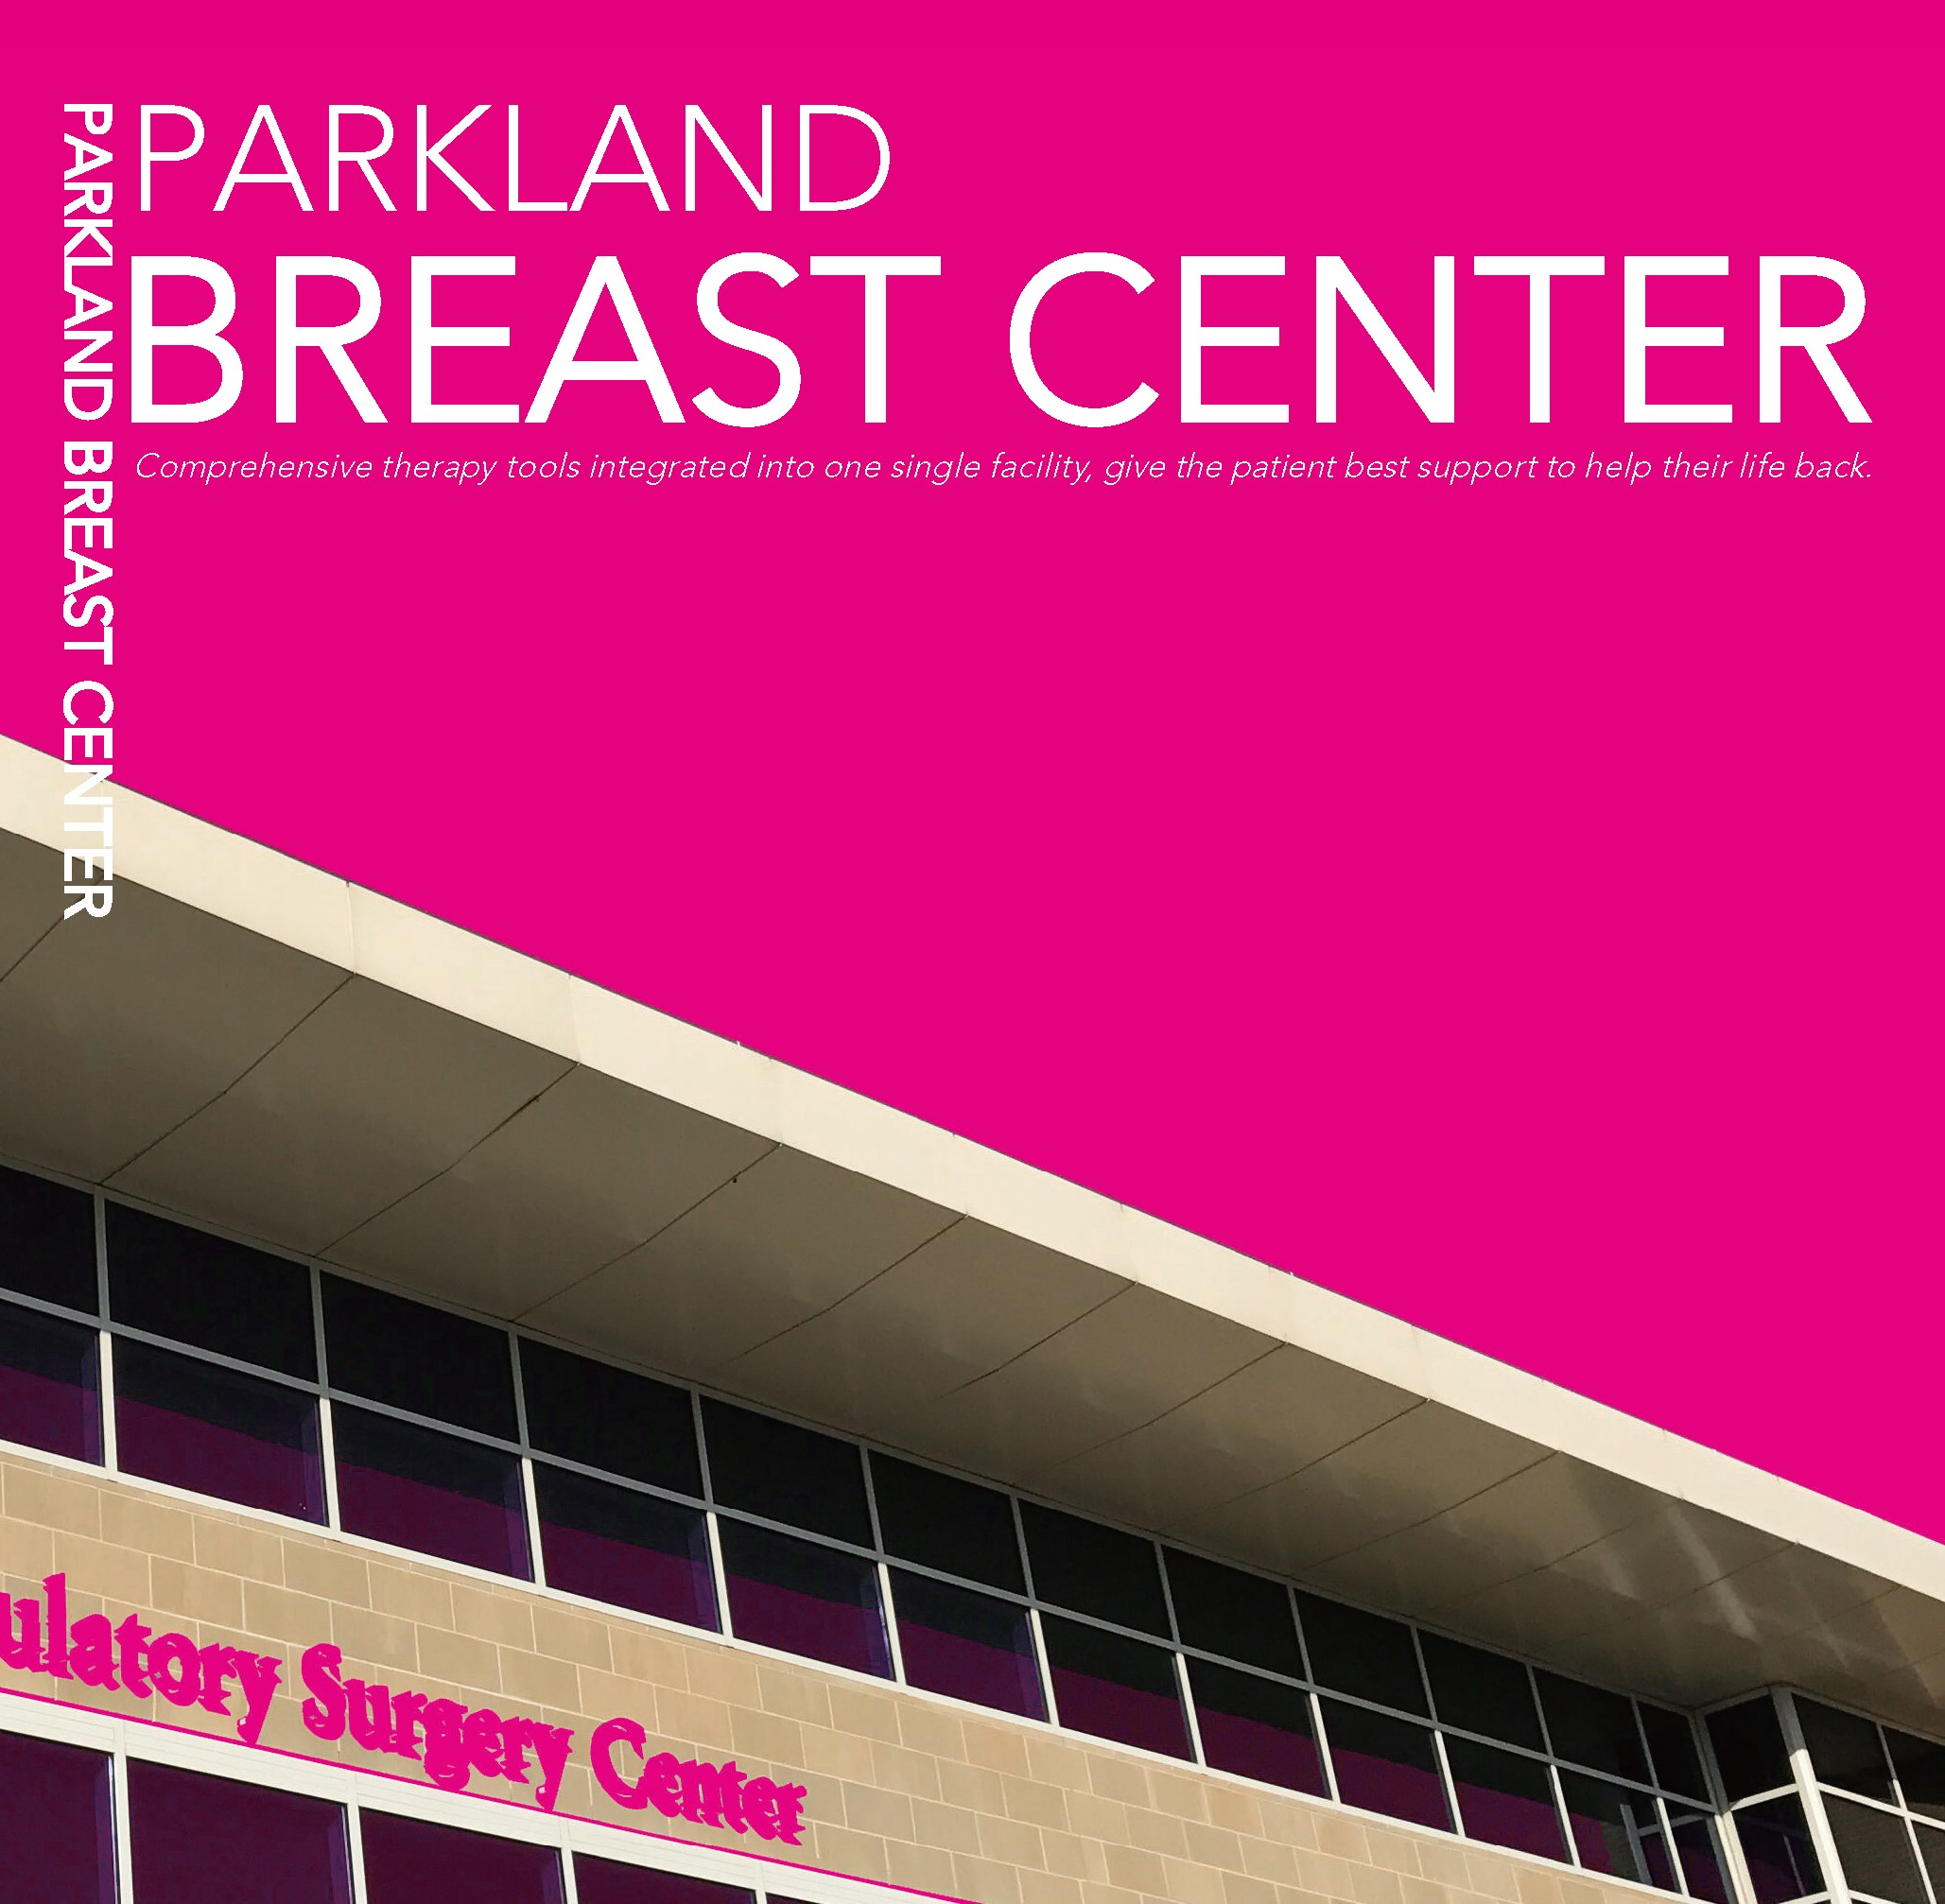 Parkland Breast Center: Comprehensive Therapy Tools Inge rated Into One Single Facility, Give the Patient Best Support to Help Their Life Back   (click for a larger preview)